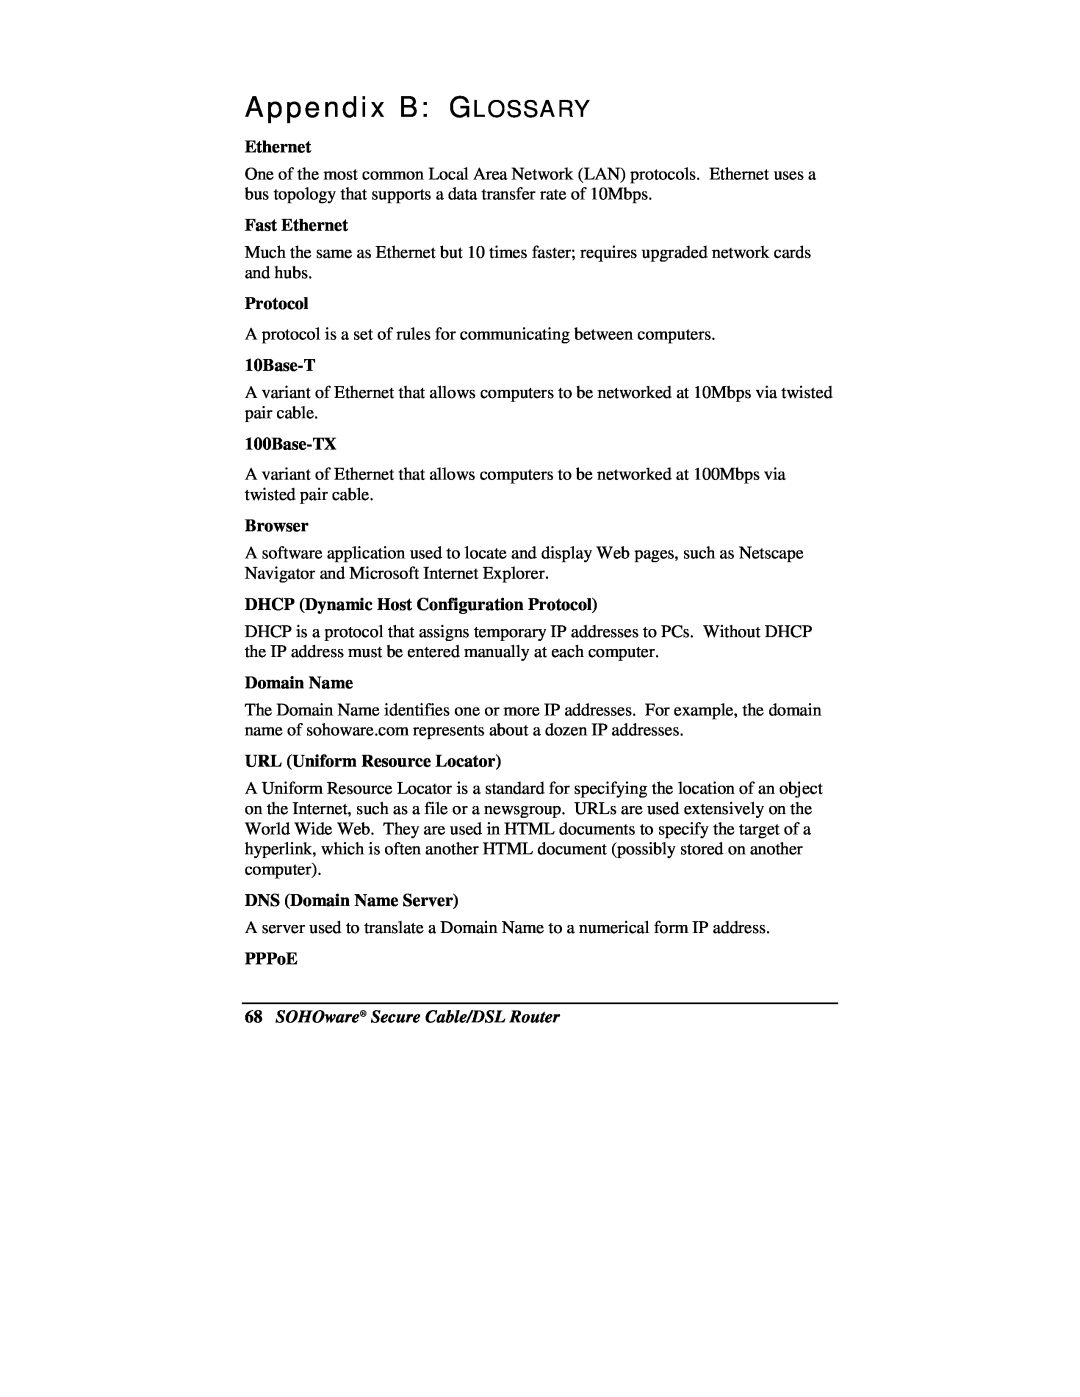 Soho NBG800 manual Appendix B GLOSSARY, SOHOware Secure Cable/DSL Router 